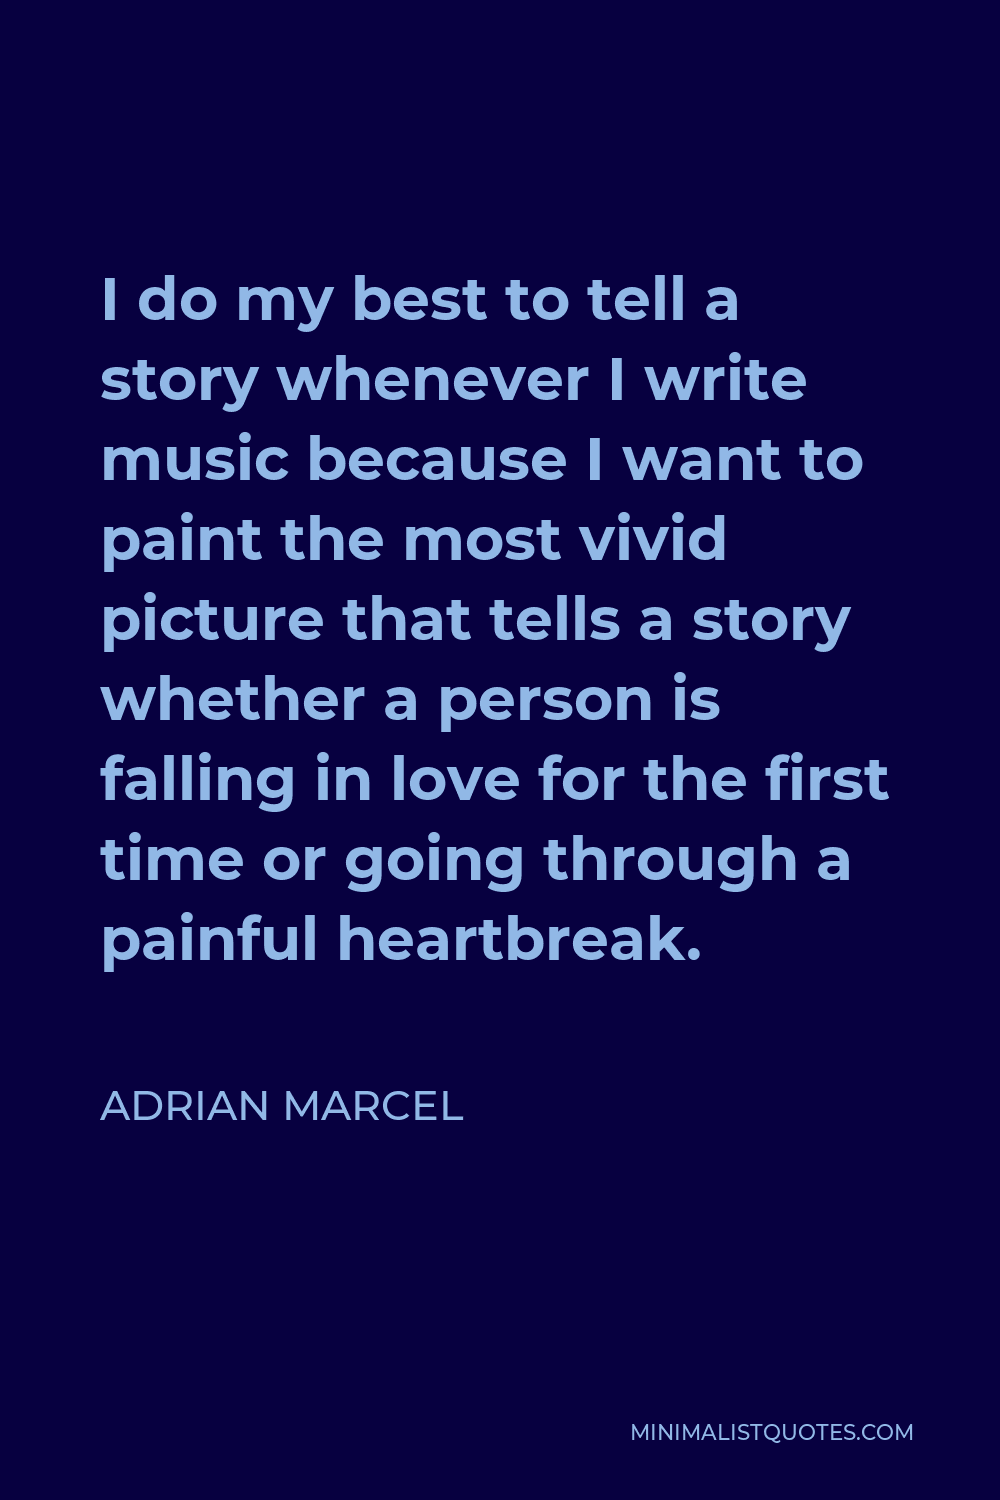 Adrian Marcel Quote - I do my best to tell a story whenever I write music because I want to paint the most vivid picture that tells a story whether a person is falling in love for the first time or going through a painful heartbreak.